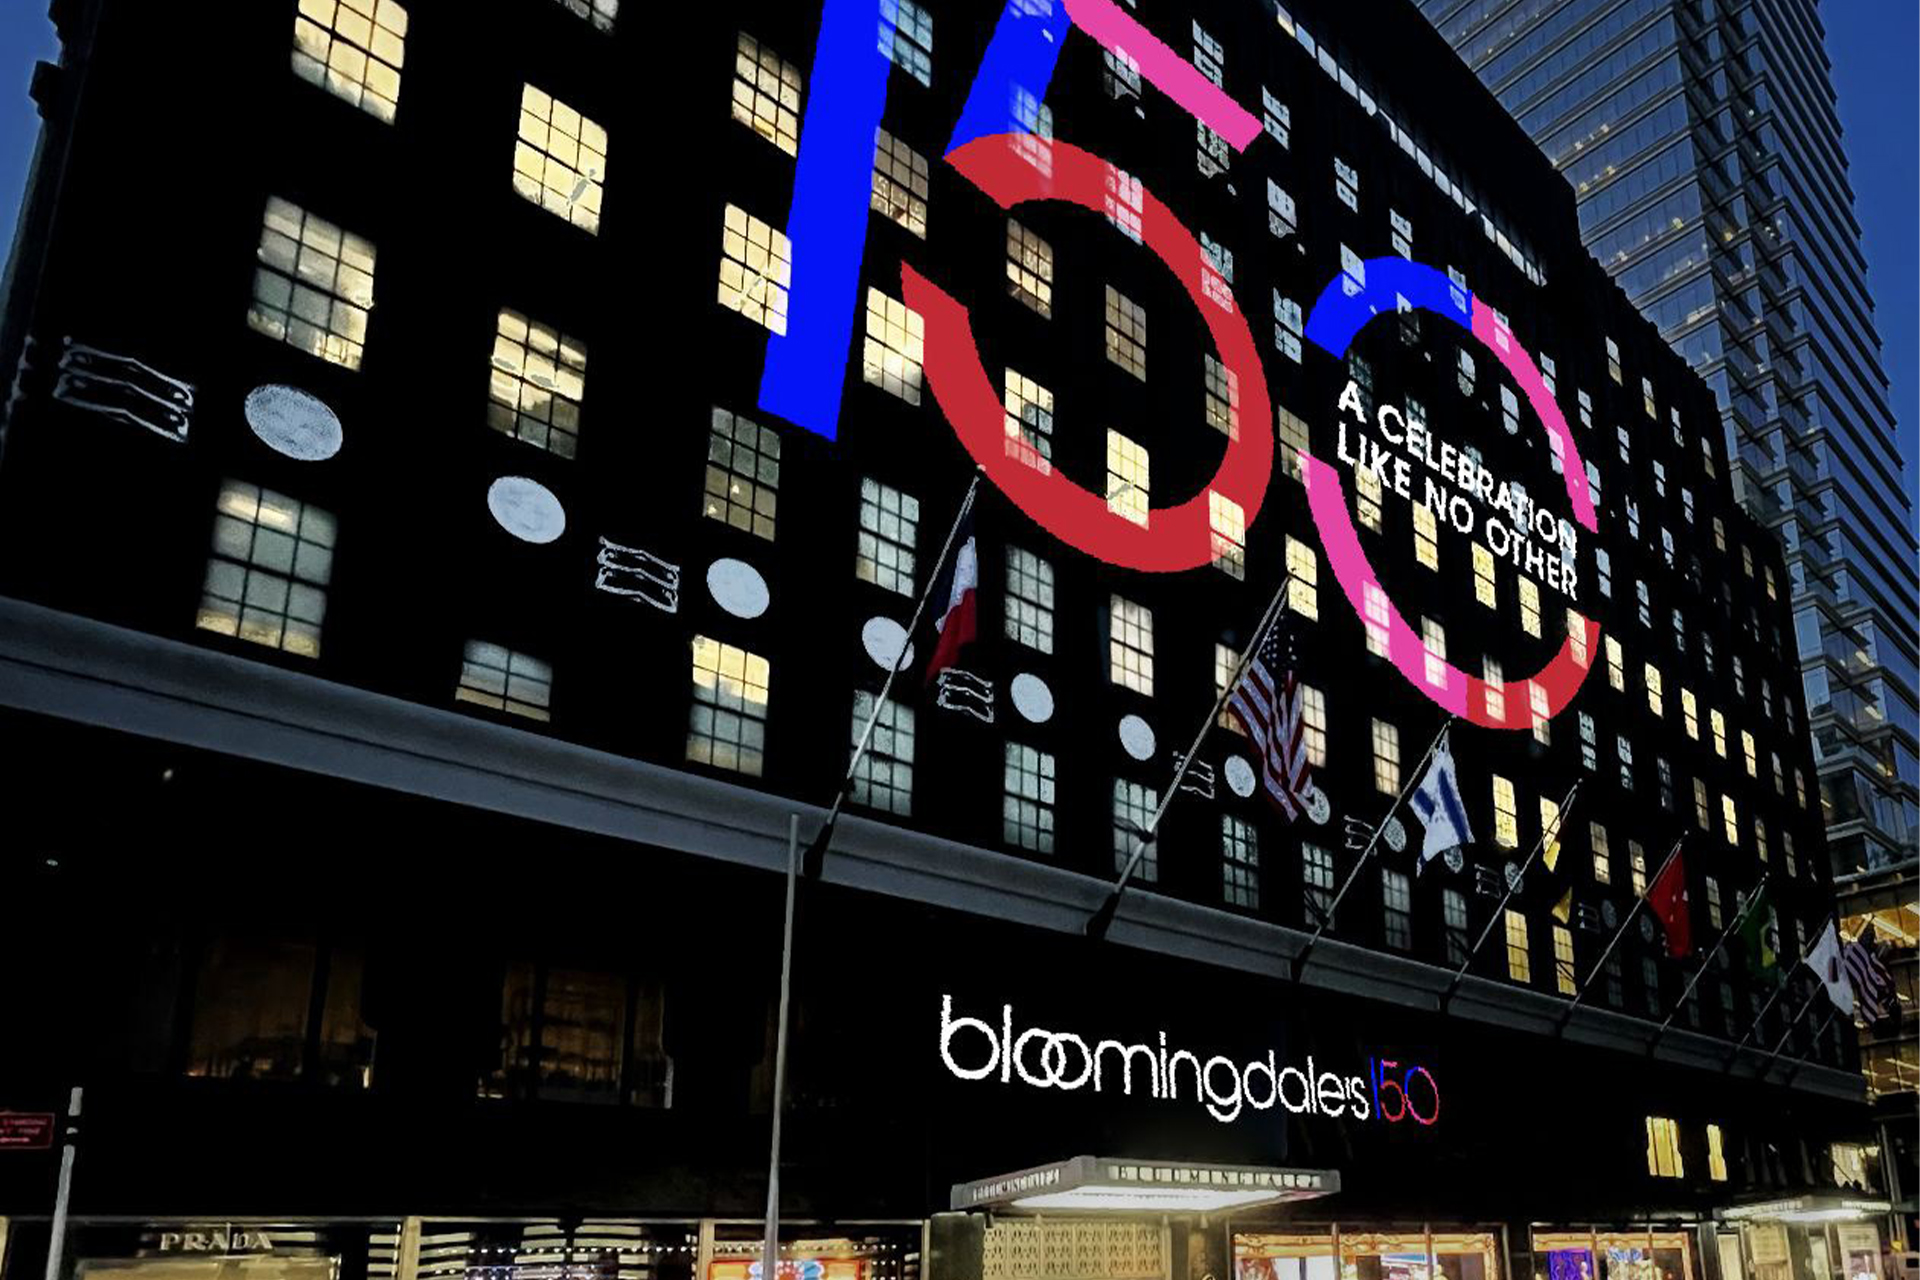 Macy's wants to take 150 of its stores upscale